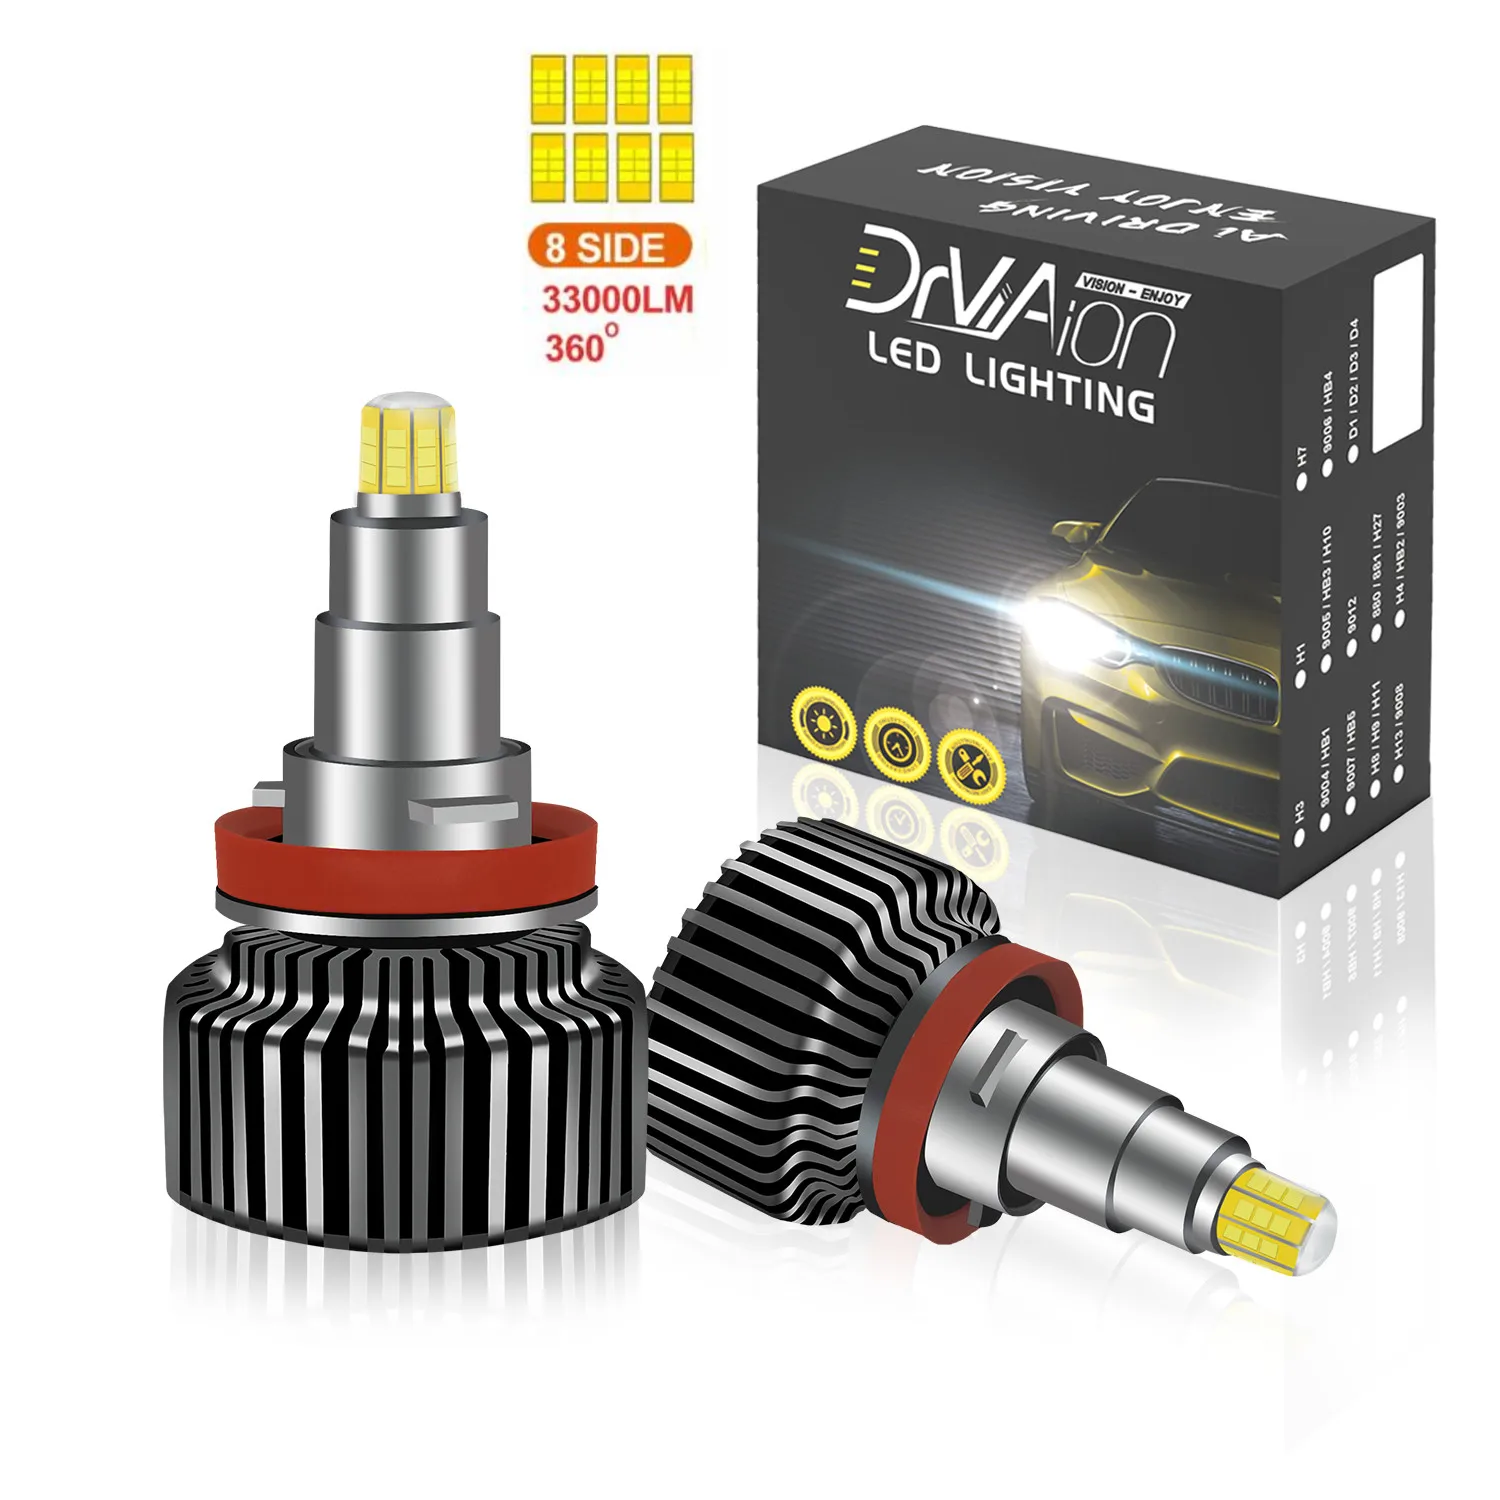 New 160W mini 8-Side 360° type headlight h4 led projector h1 led headlight h11/h8 led canbus h7 led bulb 9012 hir2 bulb for car